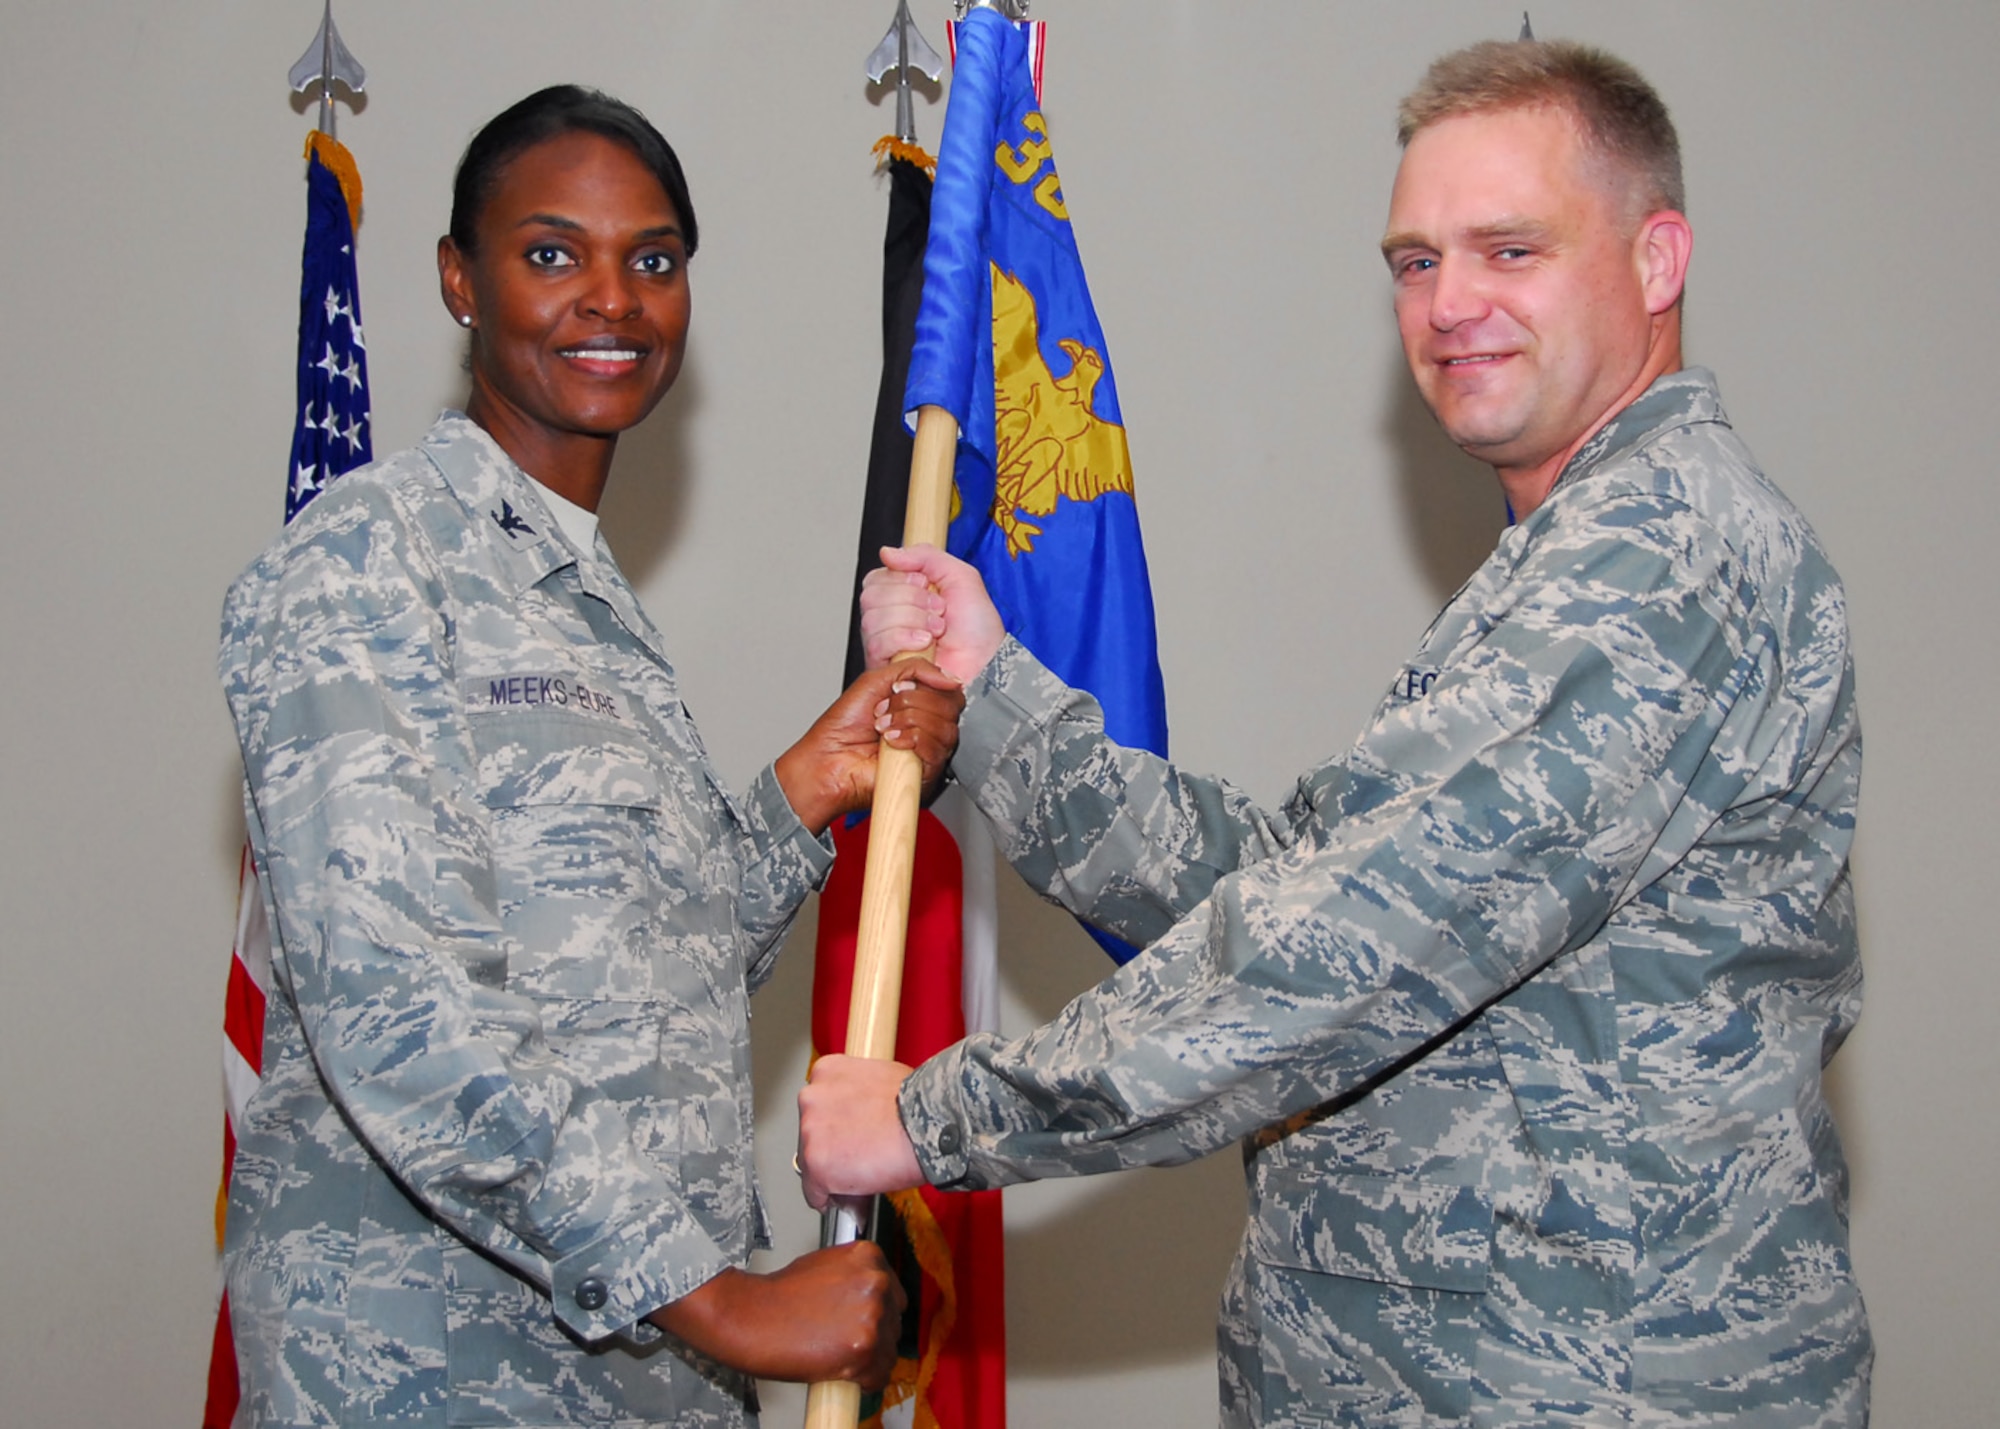 SOUTHWEST ASIA -- Lt. Col. John O'Connor receives command of the 386th Expeditionary Security Forces Squadron from Col. Marcia Meeks-Eure, 386th Expeditionary Mission Support Group commander, at an air base in Southwest Asia, June 18. Colonel O'Connor is deployed from U.S. European Command, Stuttgart, Germany. (U.S. Air Force photo/Senior Airman Courtney Richardson)